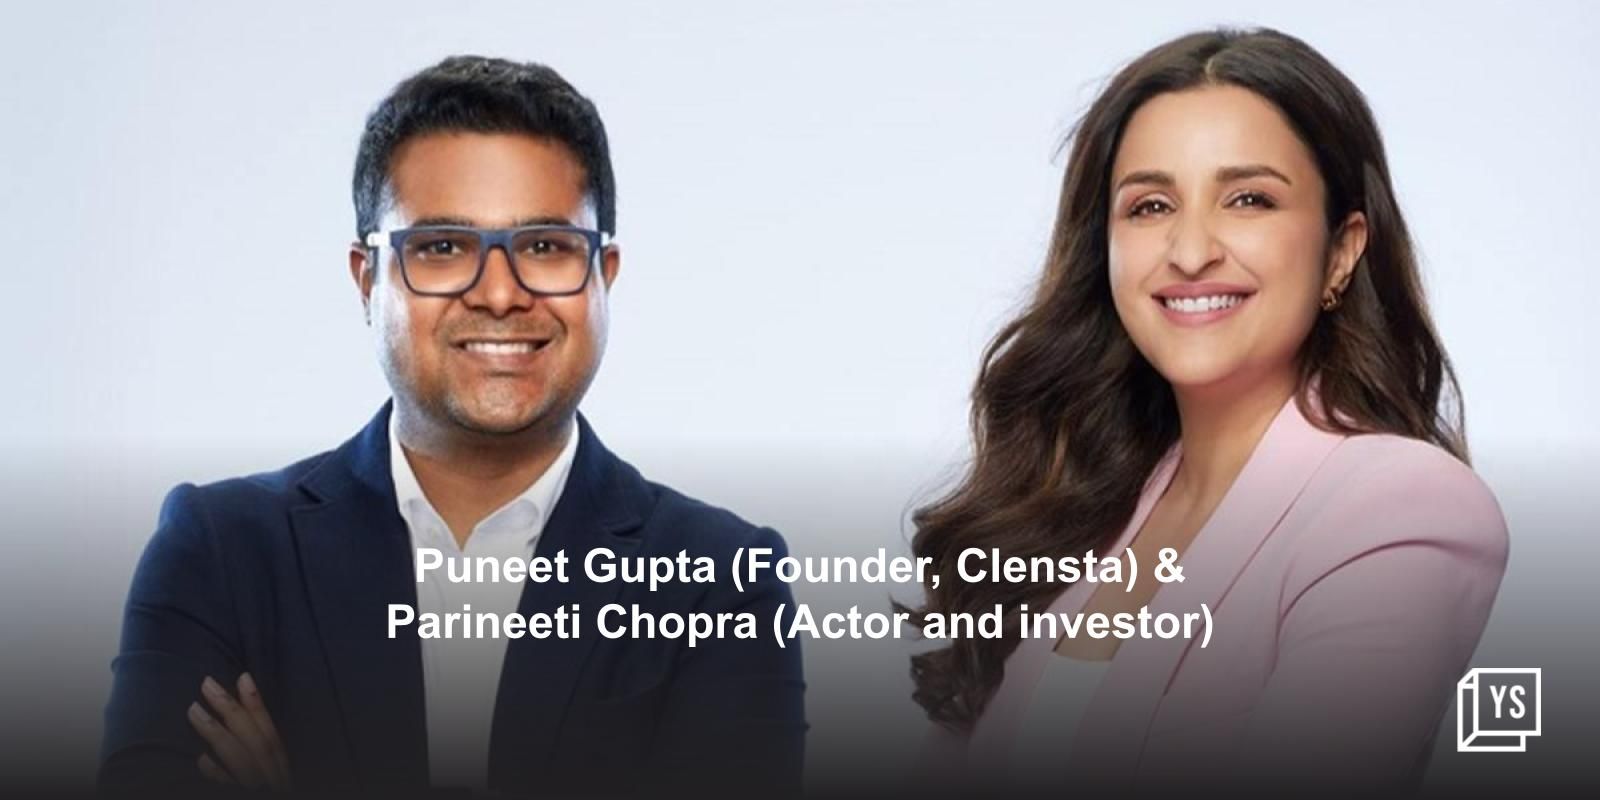 Personal care brand Clensta appoints JM Financial as investment banker to fuel expansion, fundraising